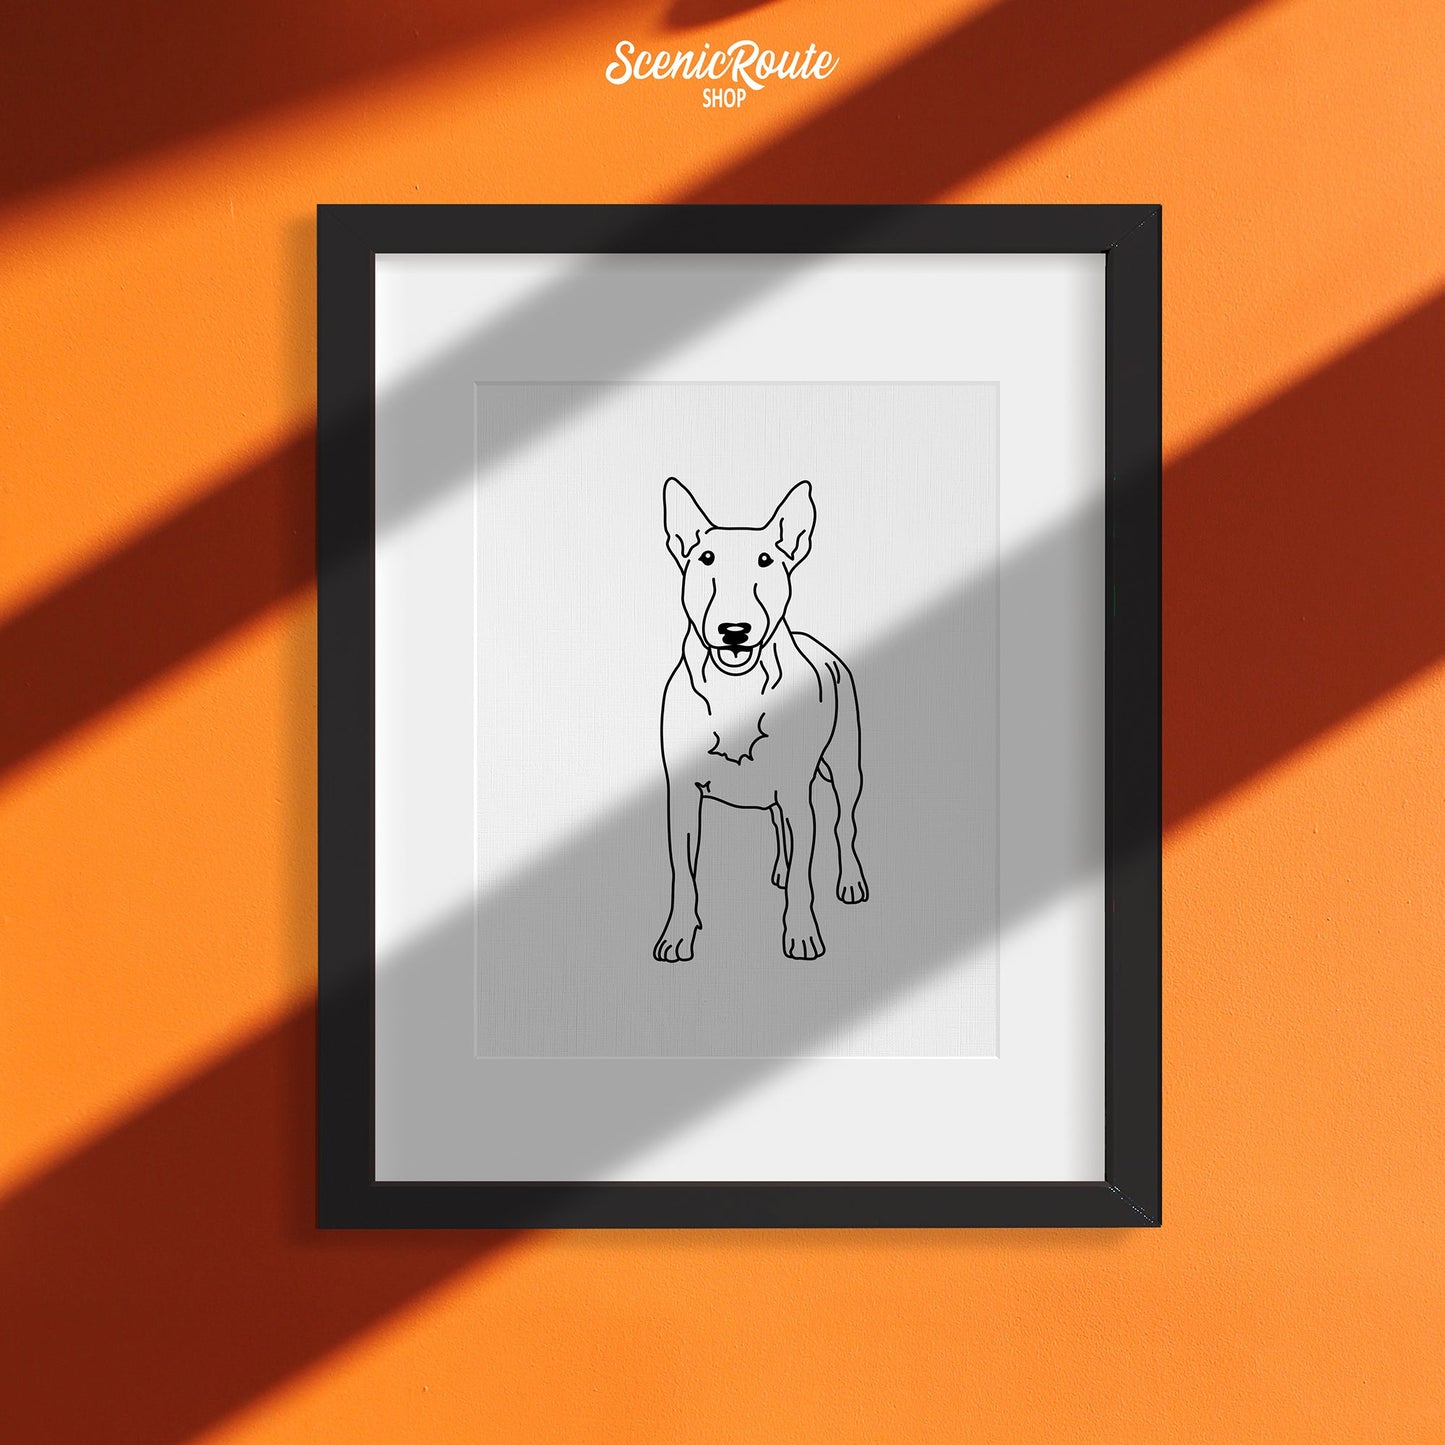 A framed line art drawing of a Bull Terrier on an orange wall with sun shadows